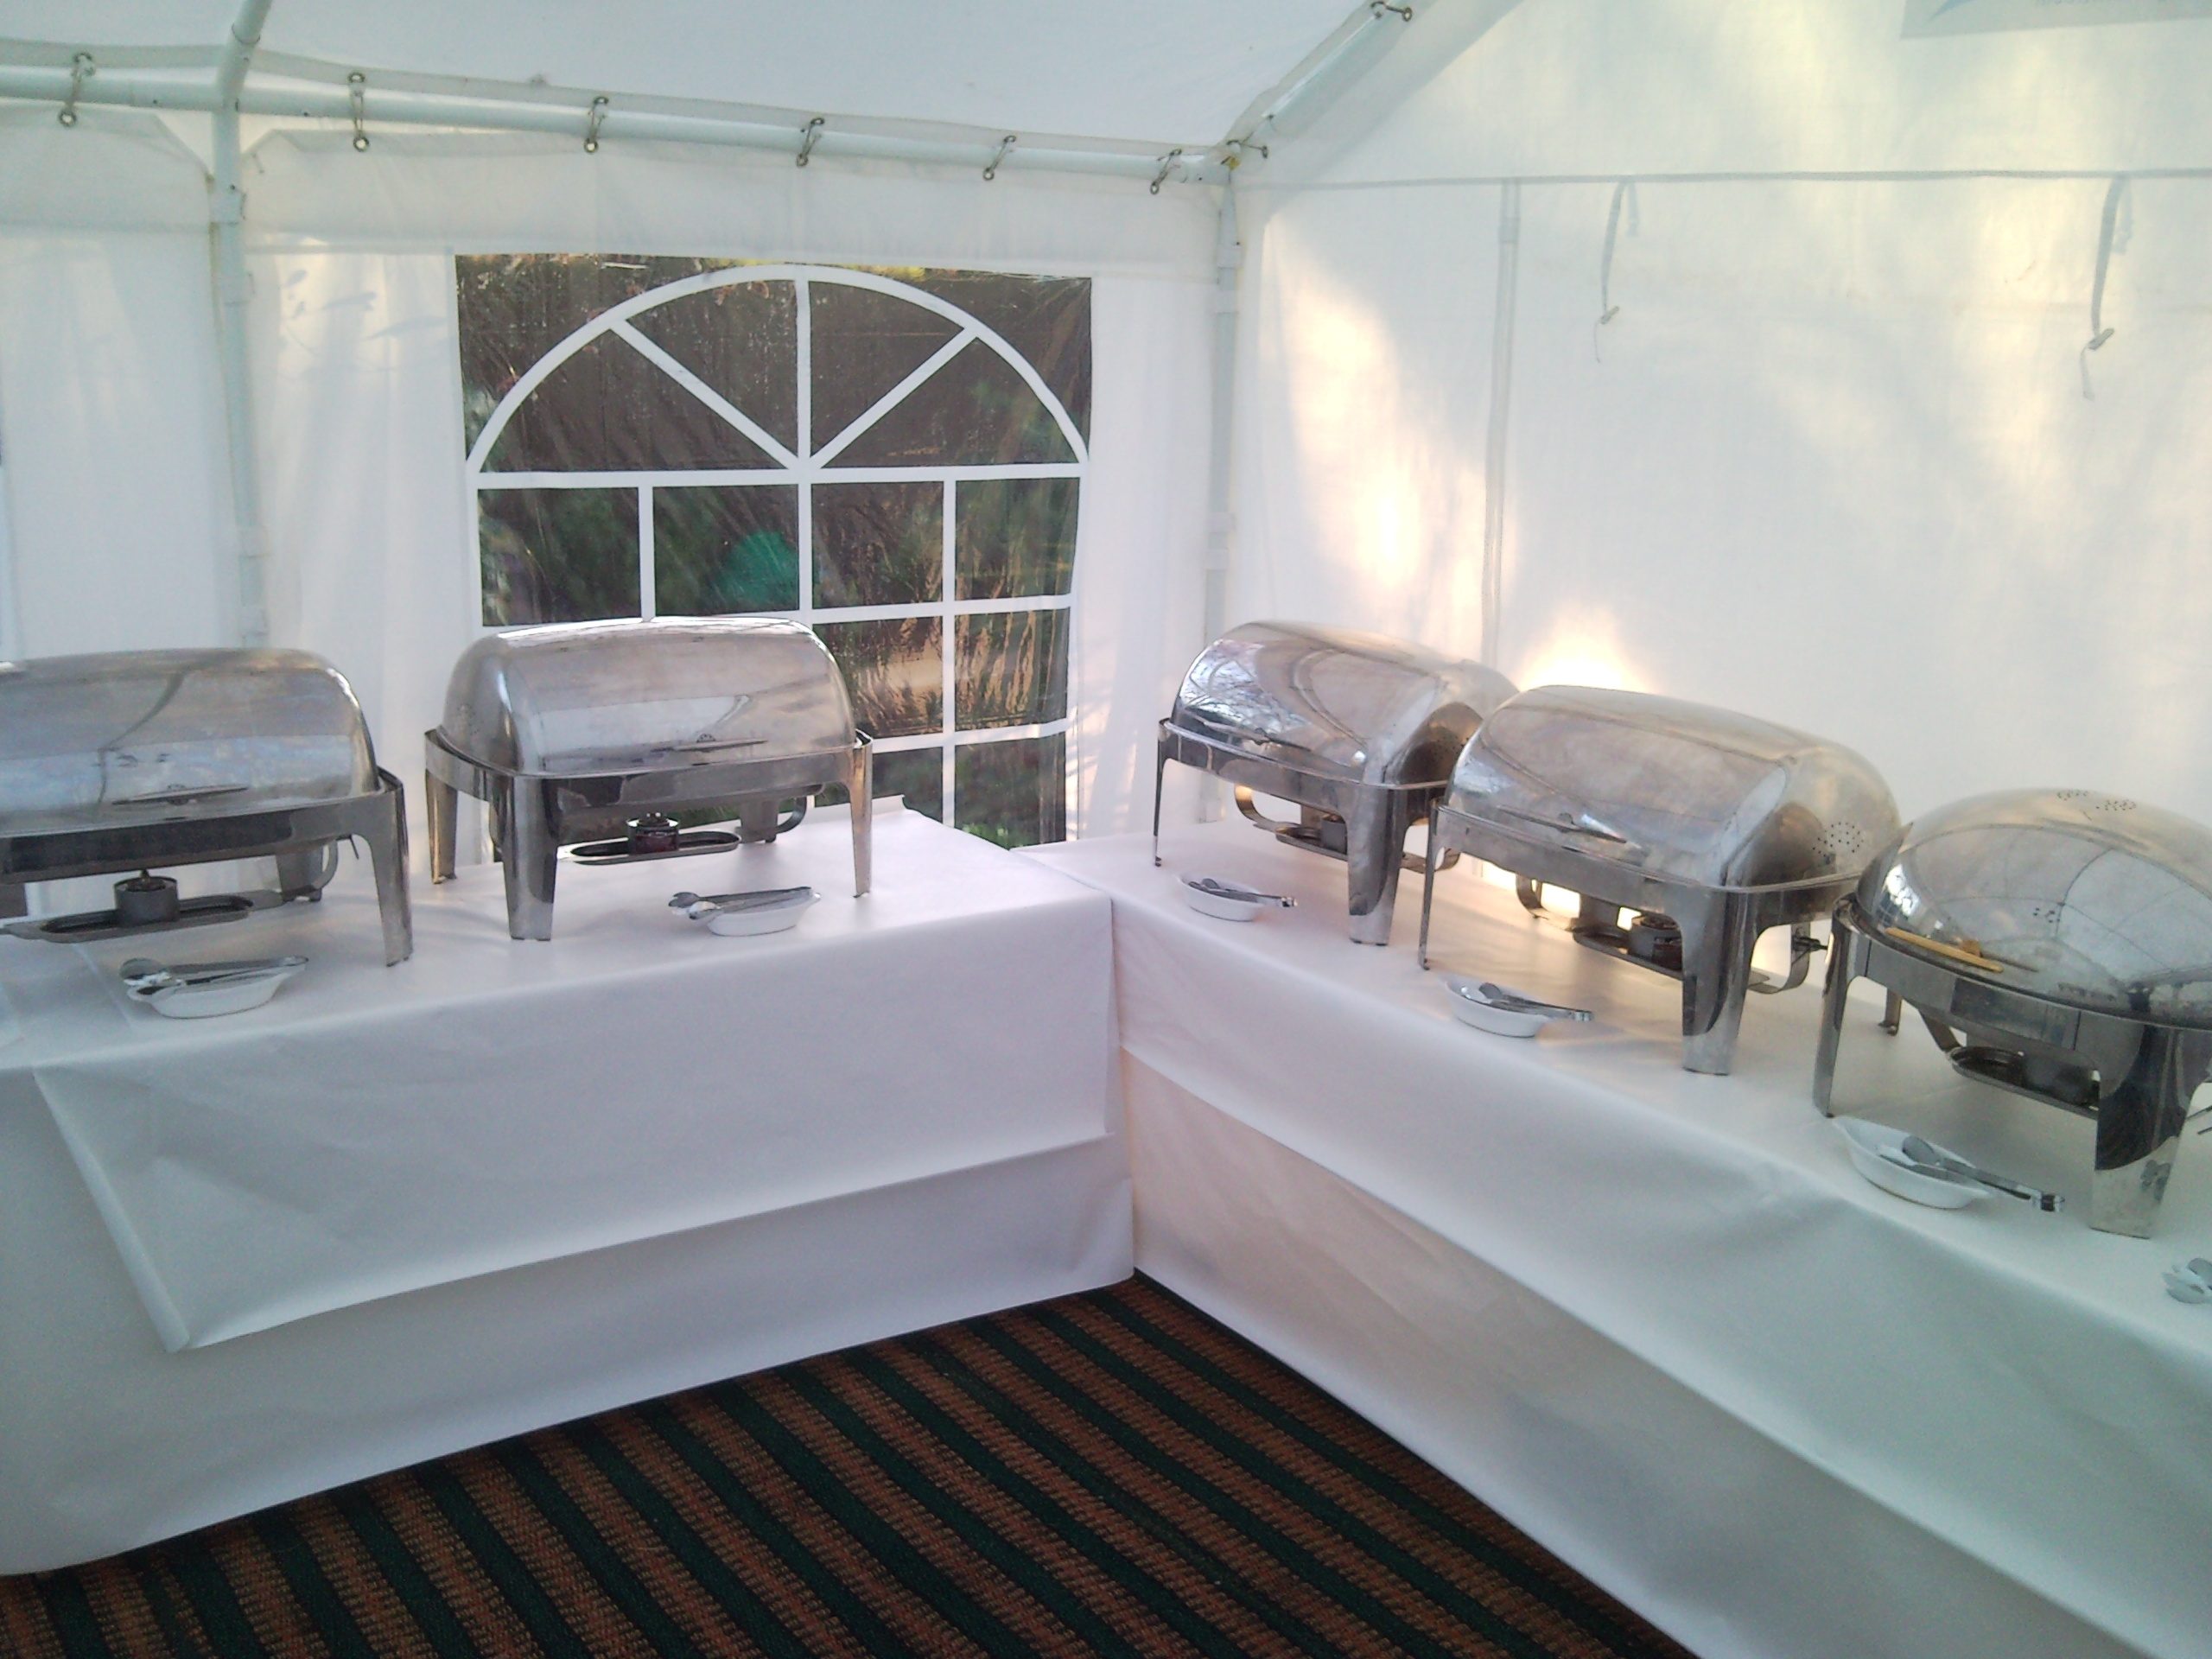 Chafing dishes on covered trestle tables